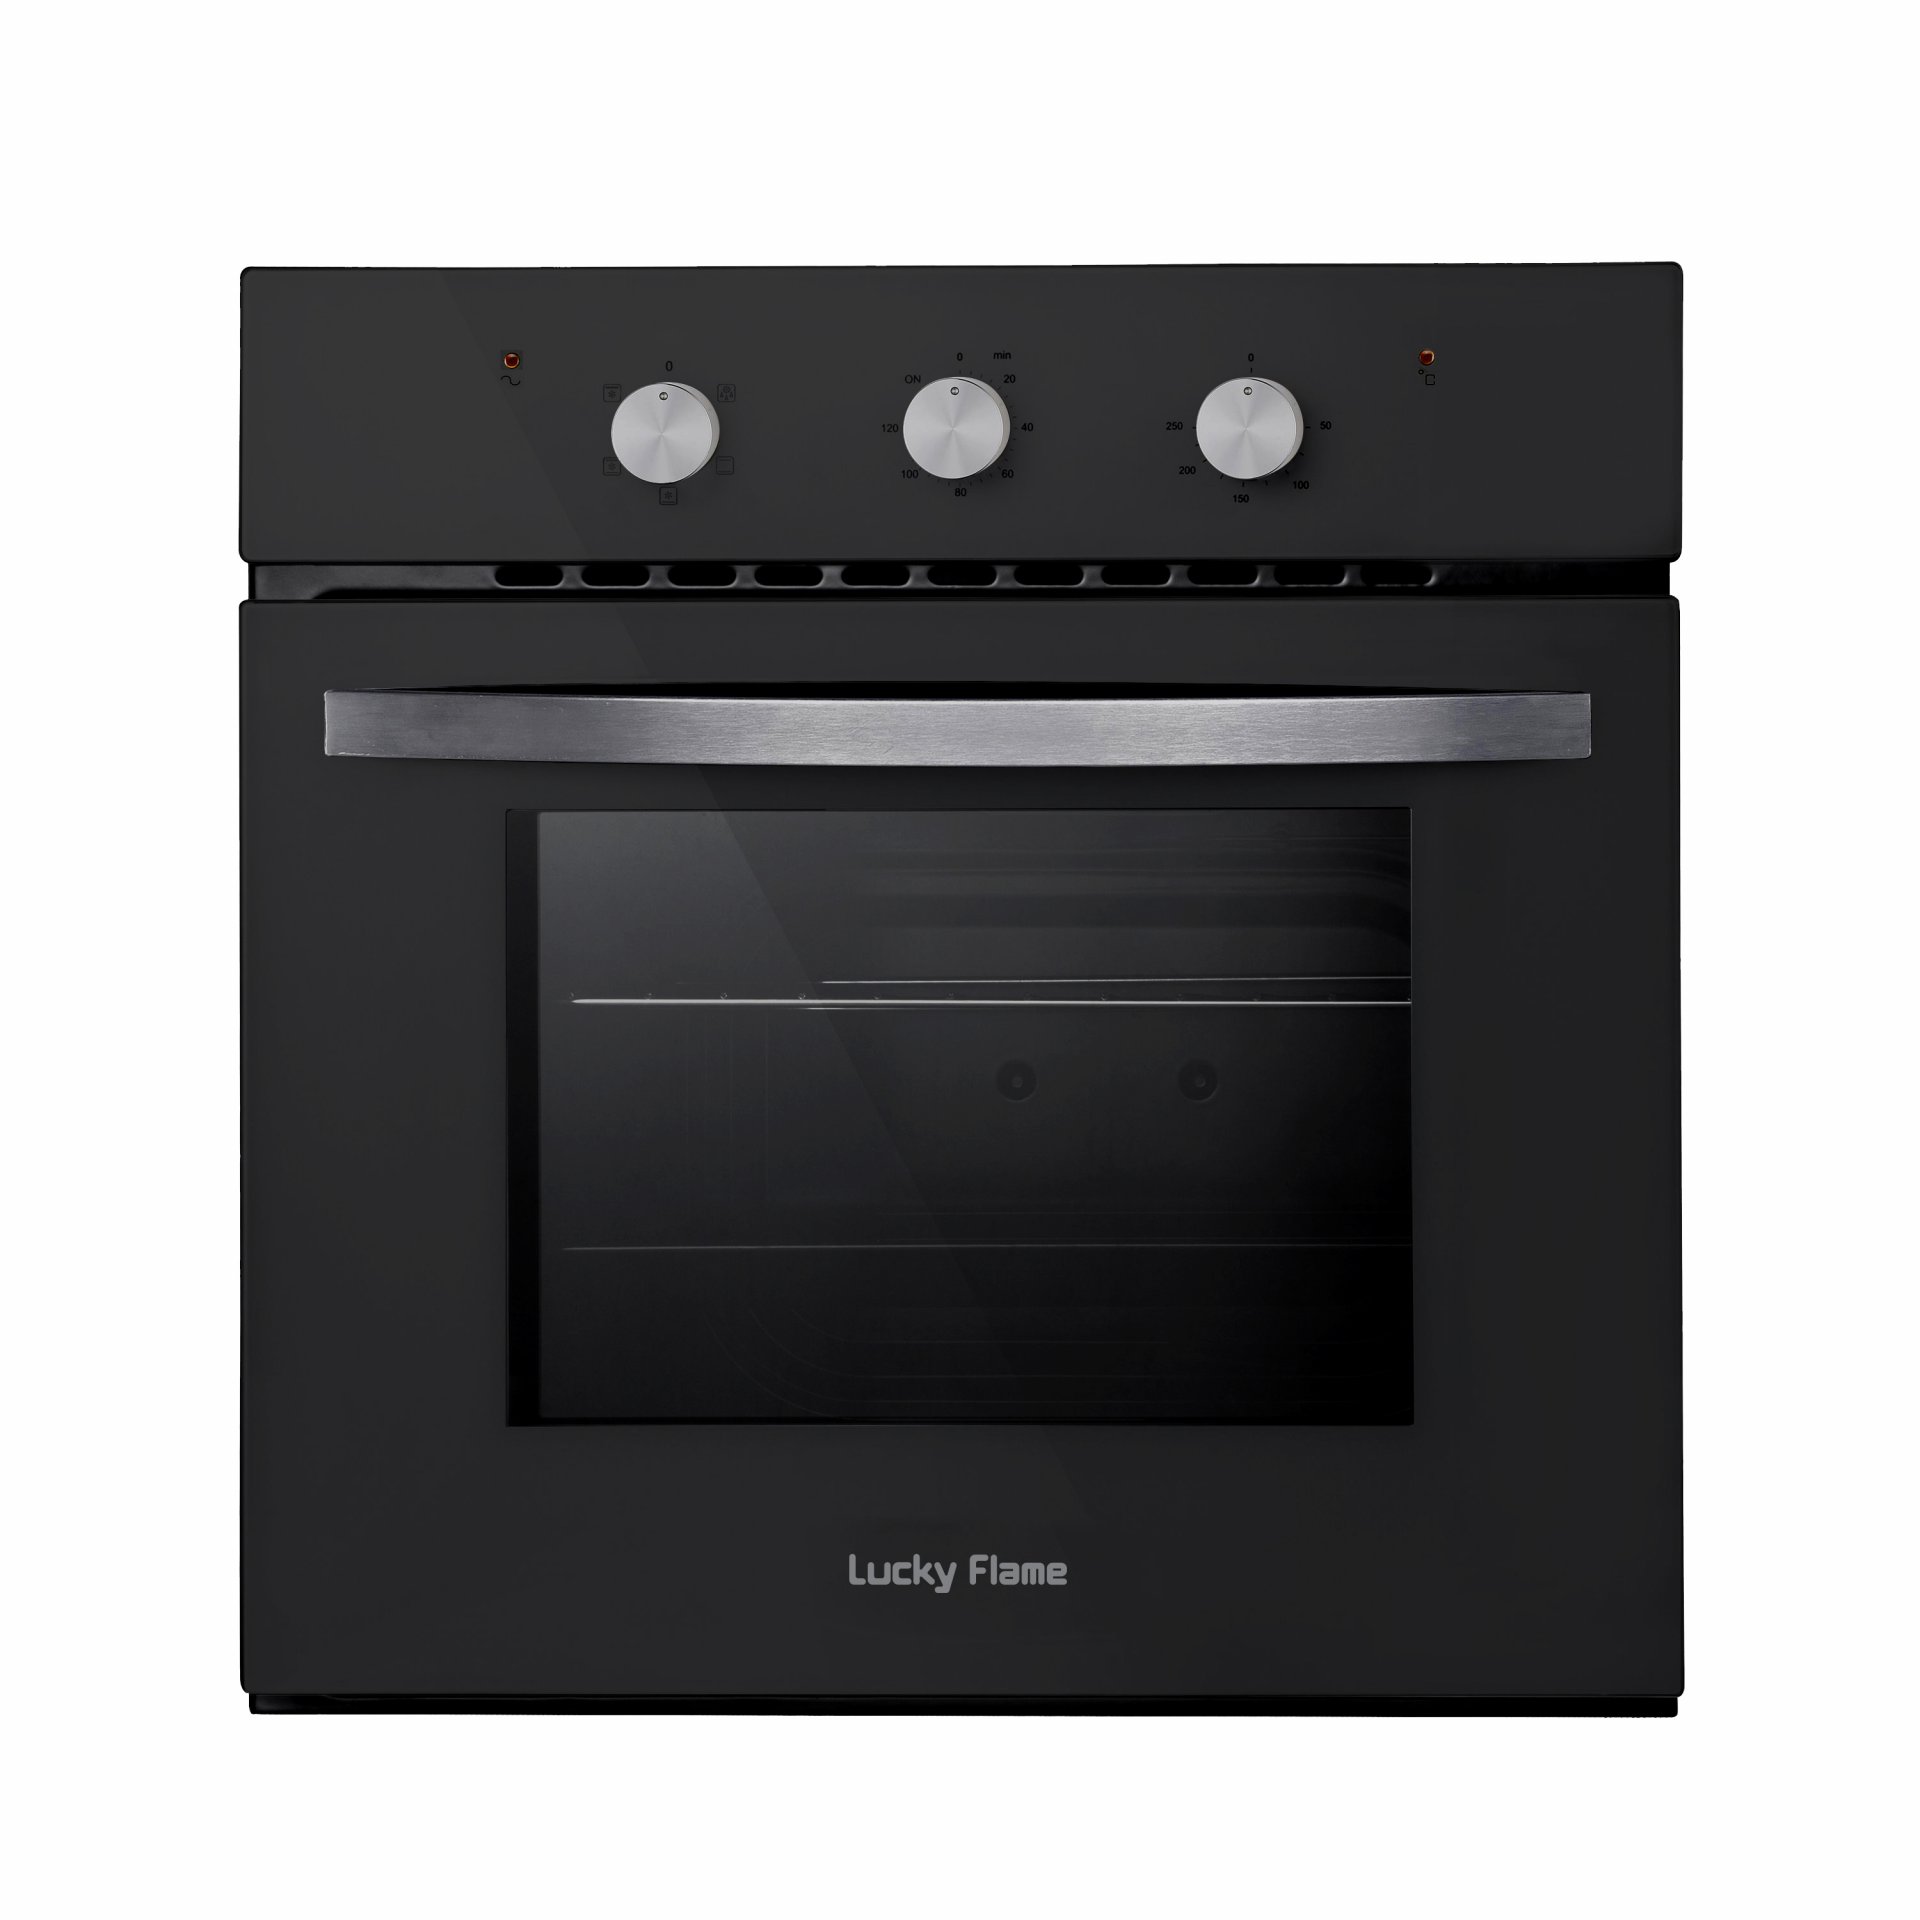 65L Built-in Electric Oven